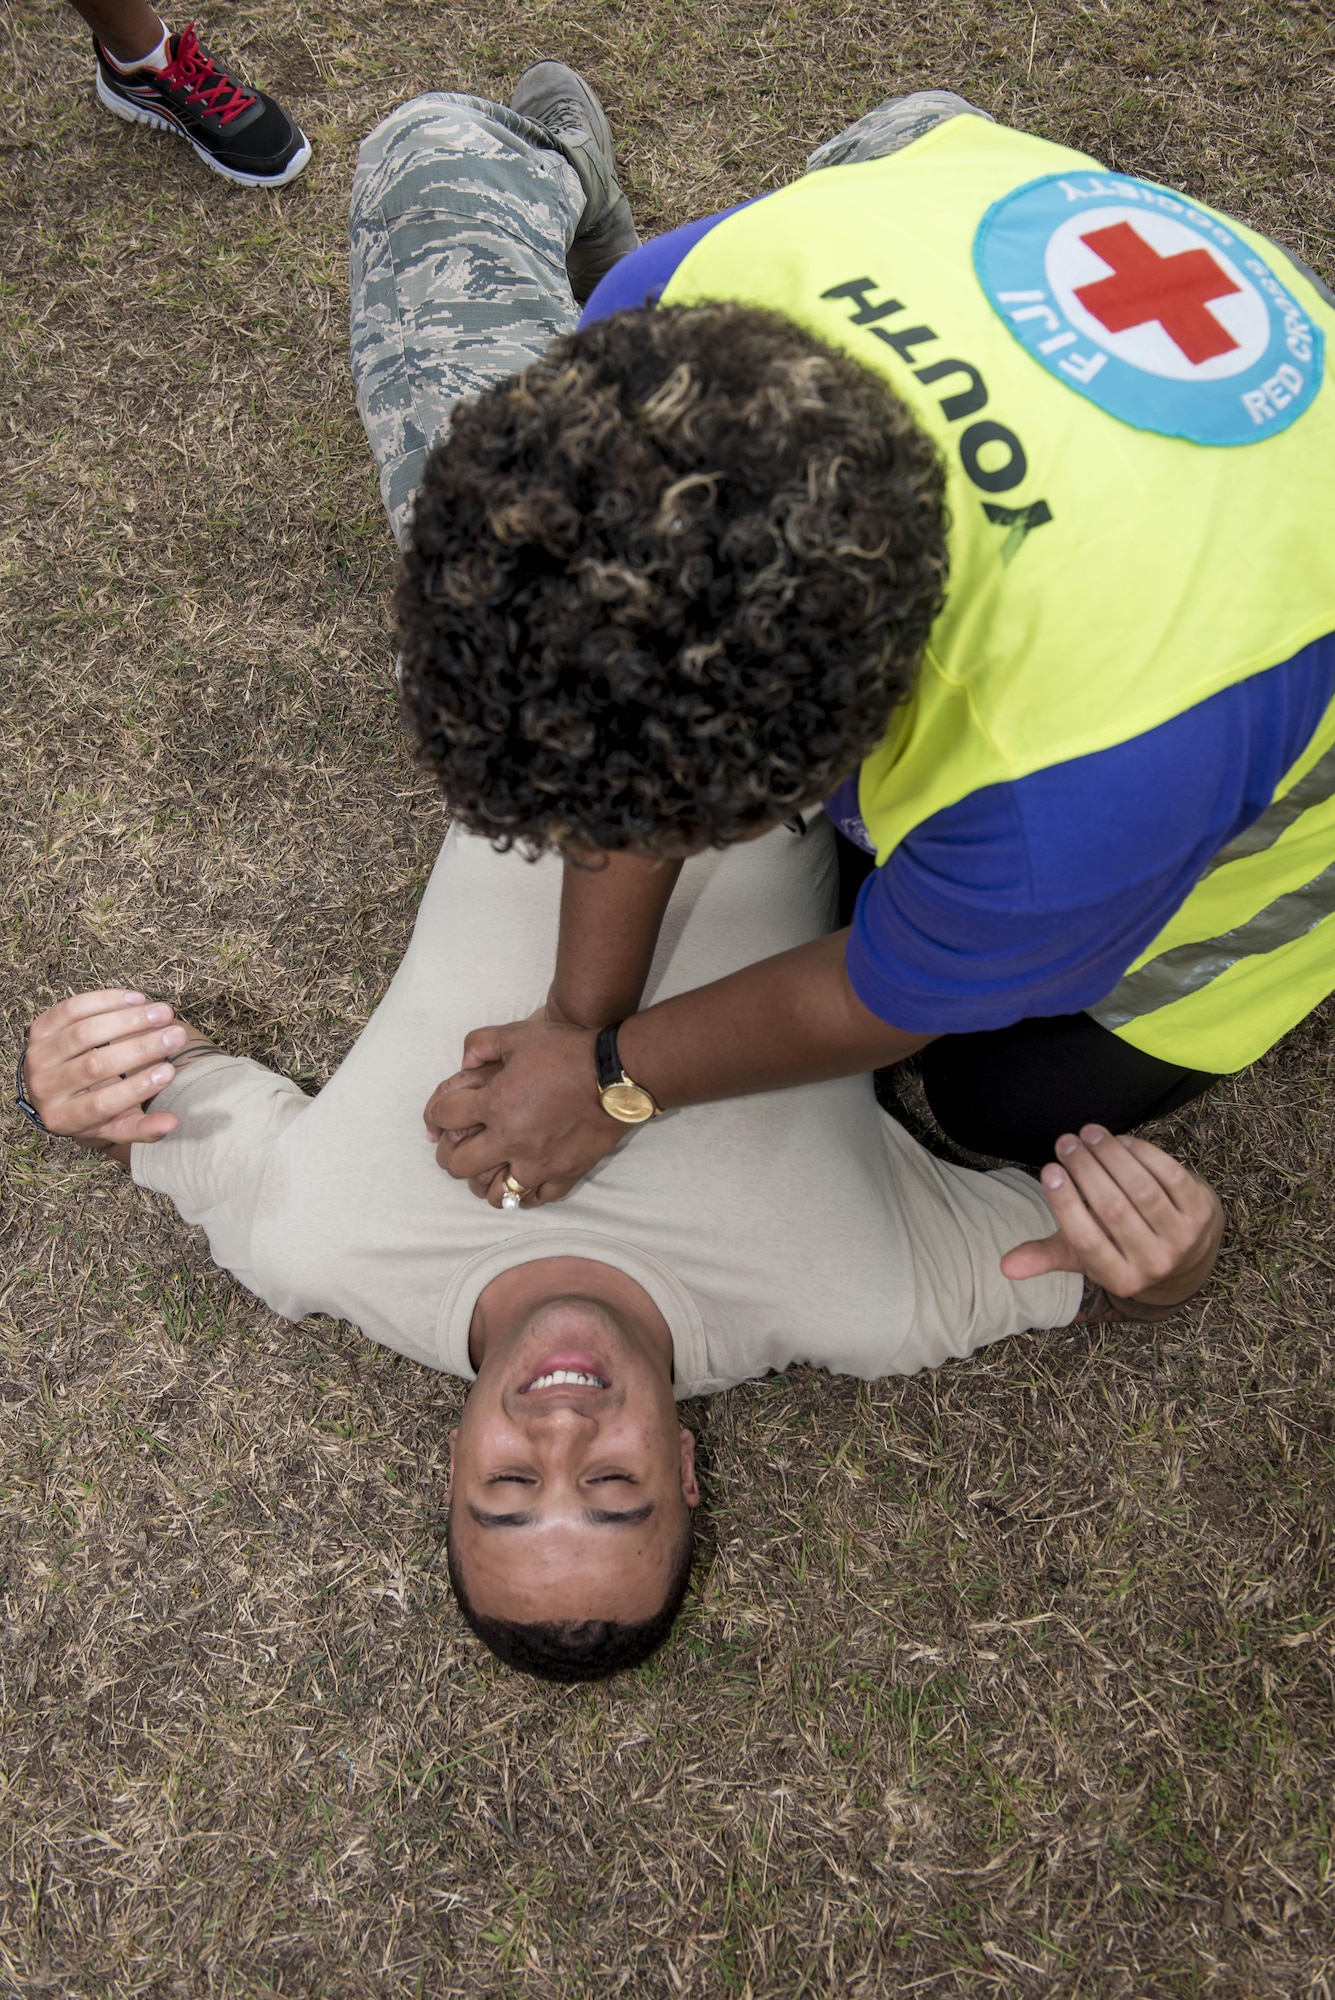 A Fijian health care volunteer, top, presses down on U.S. Air Force Senior Airman Chris Rodgers, an aerospace medical service journeyman with the 35th Medical Operations Squadron at Misawa Air Base, Japan, while practicing the basics of CPR during a hands-on training as part of Pacific Angel 17-3 at Tagitagi Sangam School and Kindergarten in Tavua, Fiji, July 15, 2017. Rodgers and seven other Misawa Airmen joined more than 50 U.S. service members in support of PACANGEL 17-3. The exercise strengthens the United States’ abilities in working together with Fiji and other nations and organizations to build capacity and partnership in the Indo-Asia-Pacific region. (U.S. Air Force photo by Tech. Sgt. Benjamin W. Stratton)